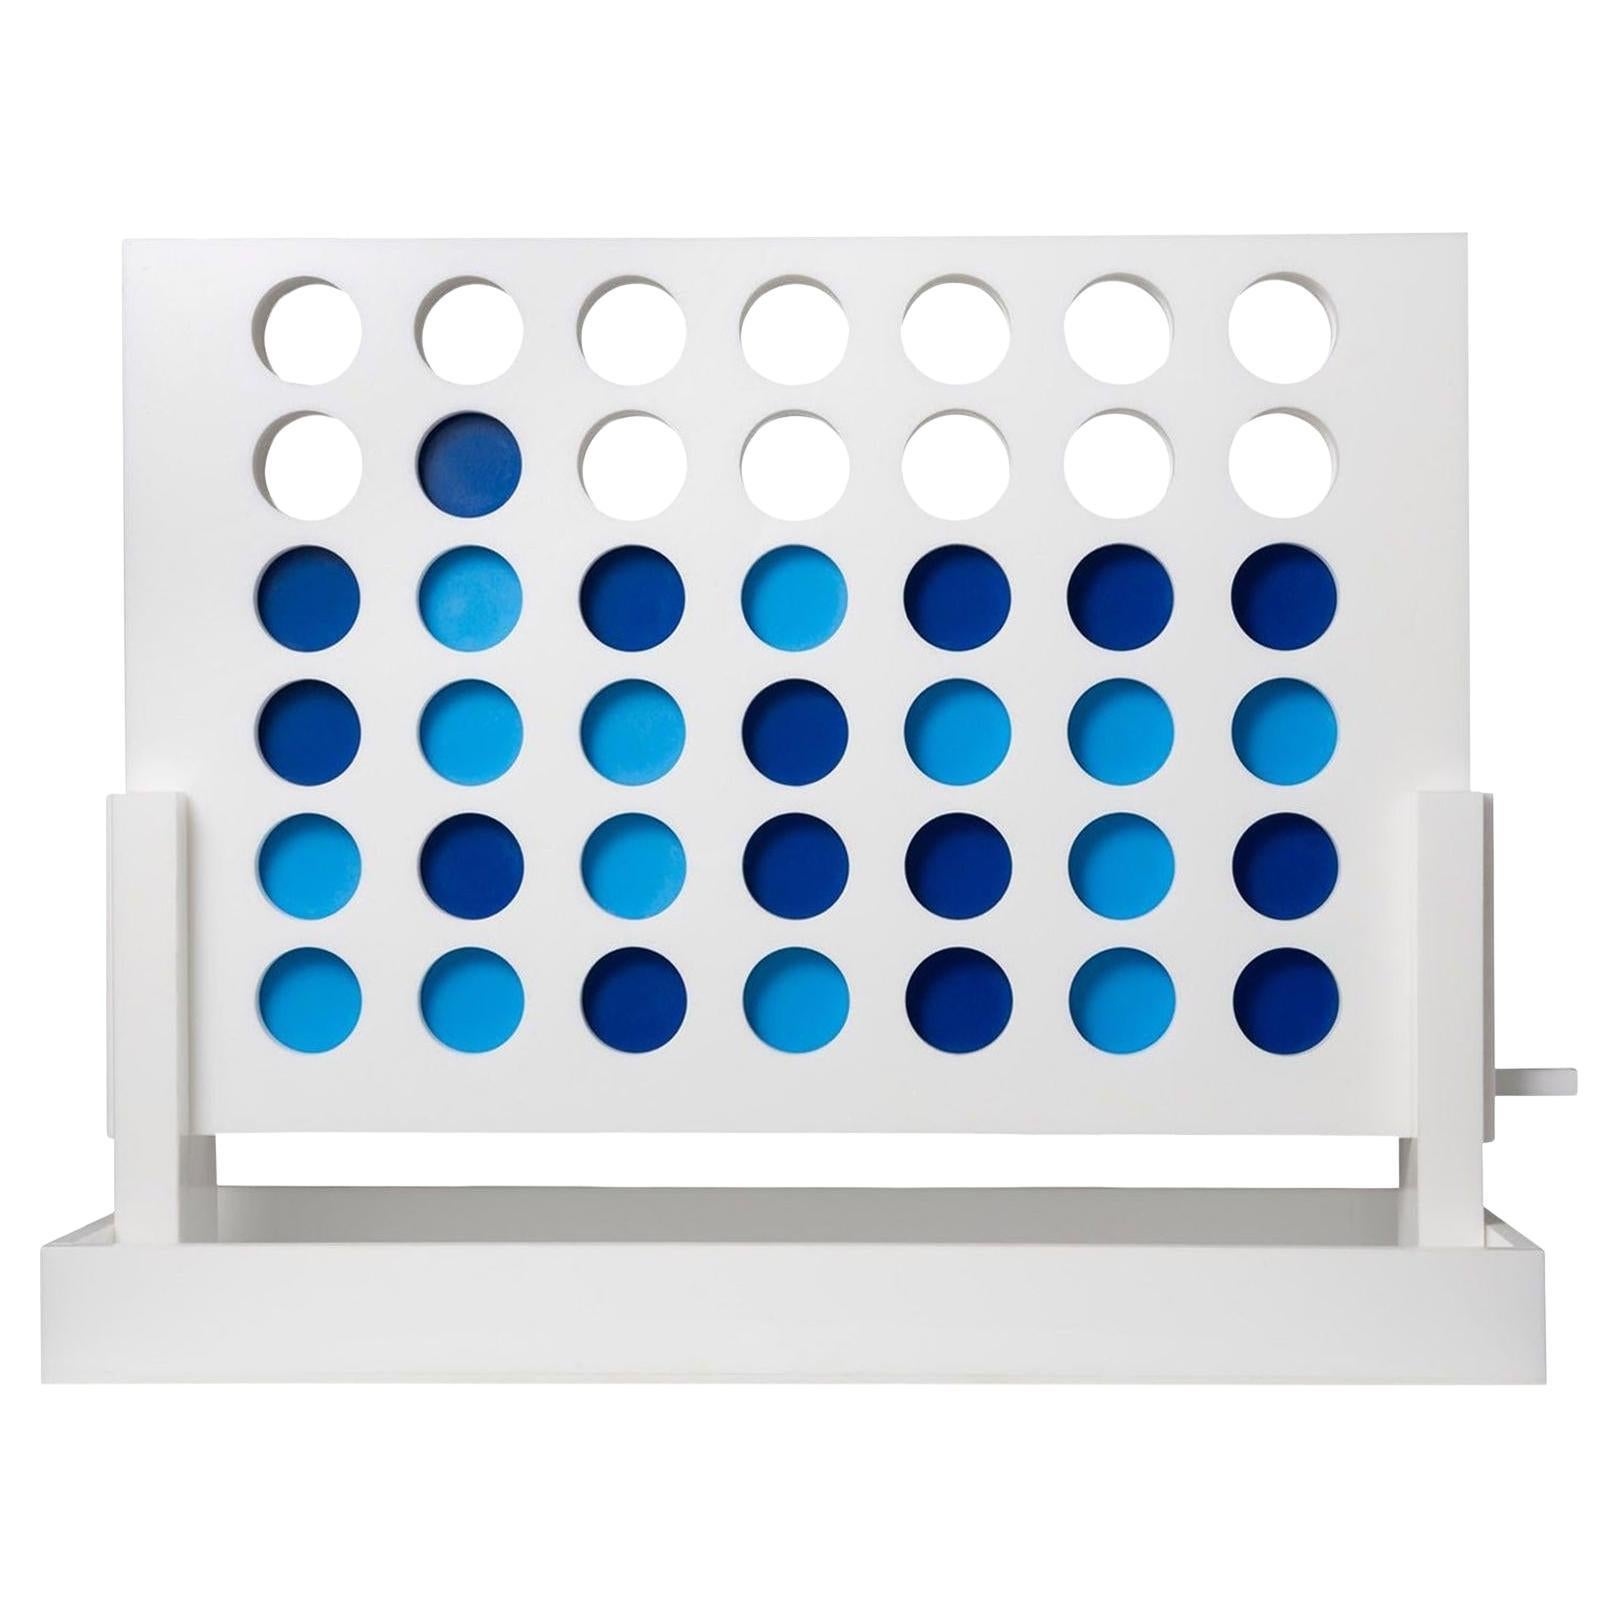 White and Blue Acrylic Connect Four Game